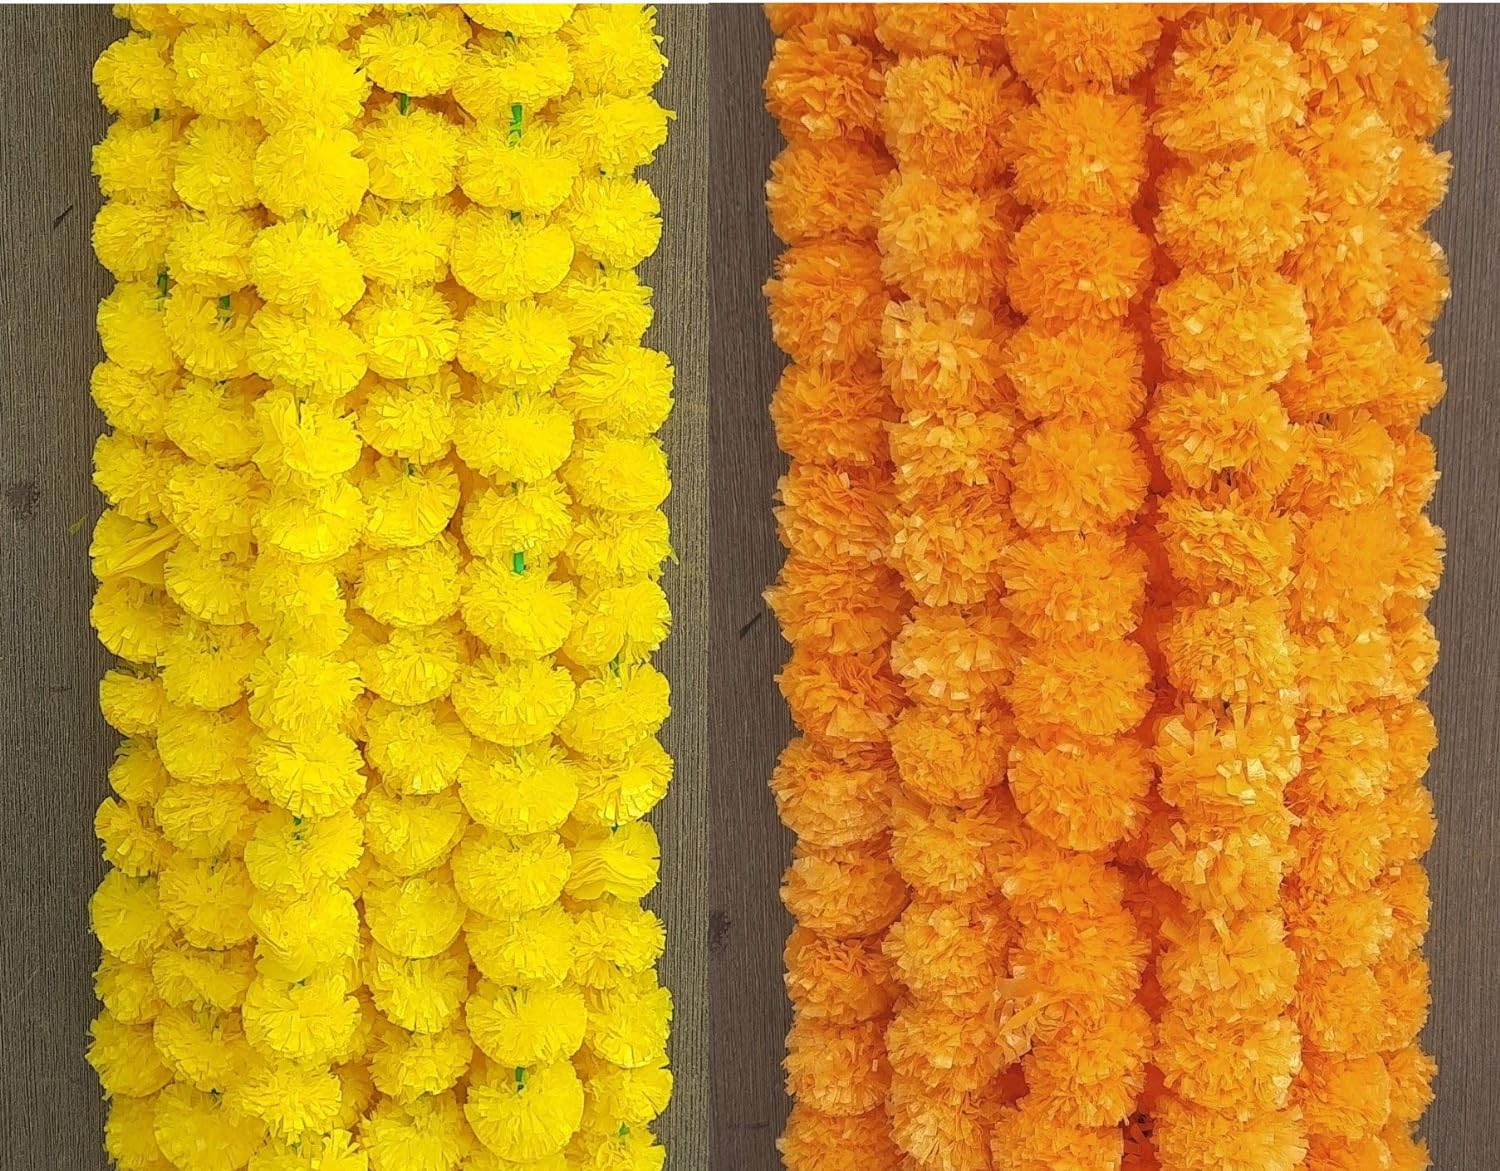 150 pc lot orange with yellow Handmade artificial Marigold Garland Party wedding 